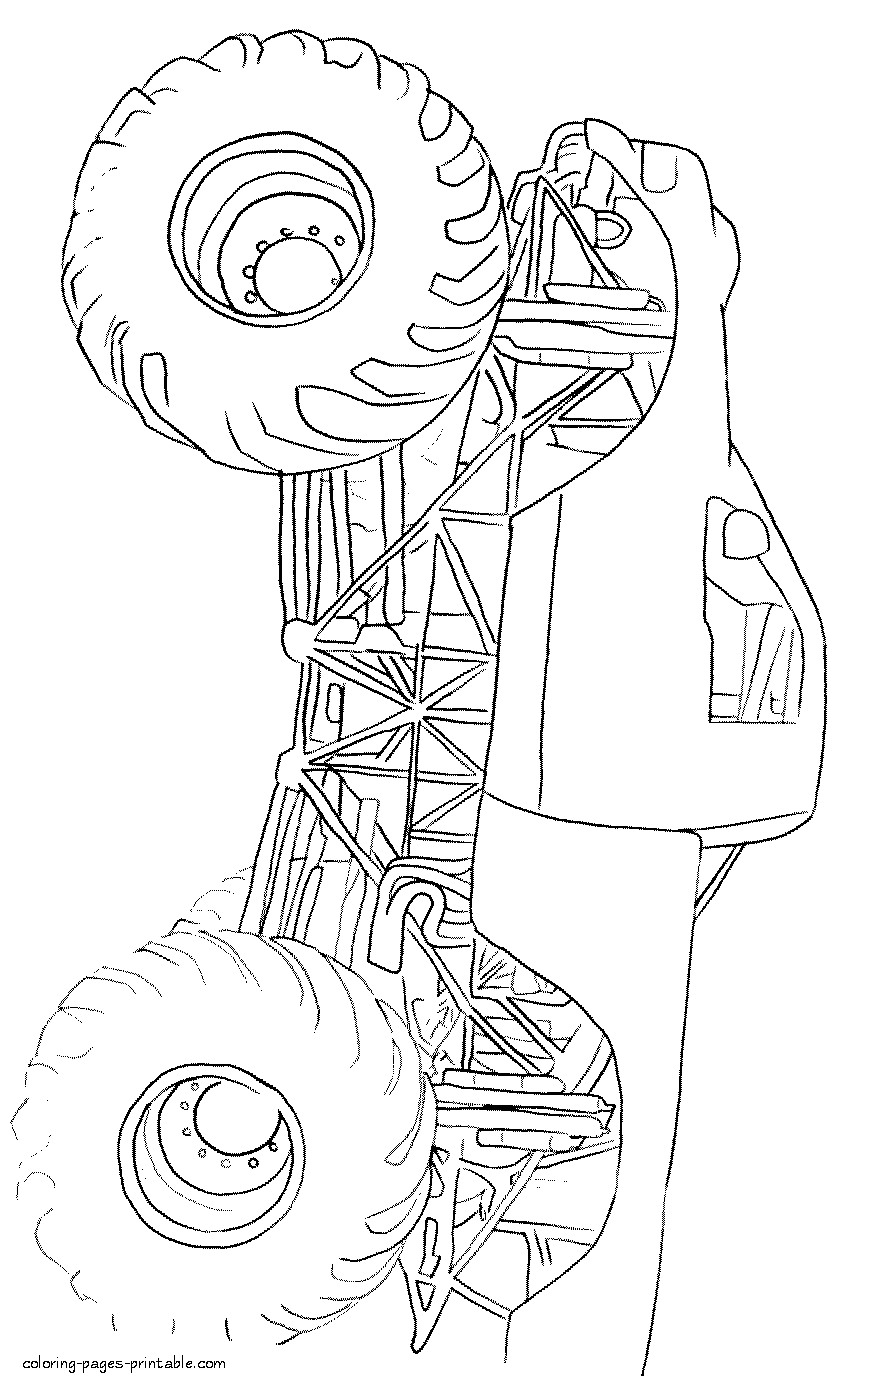 Coloring pages cars. A monster truck picture